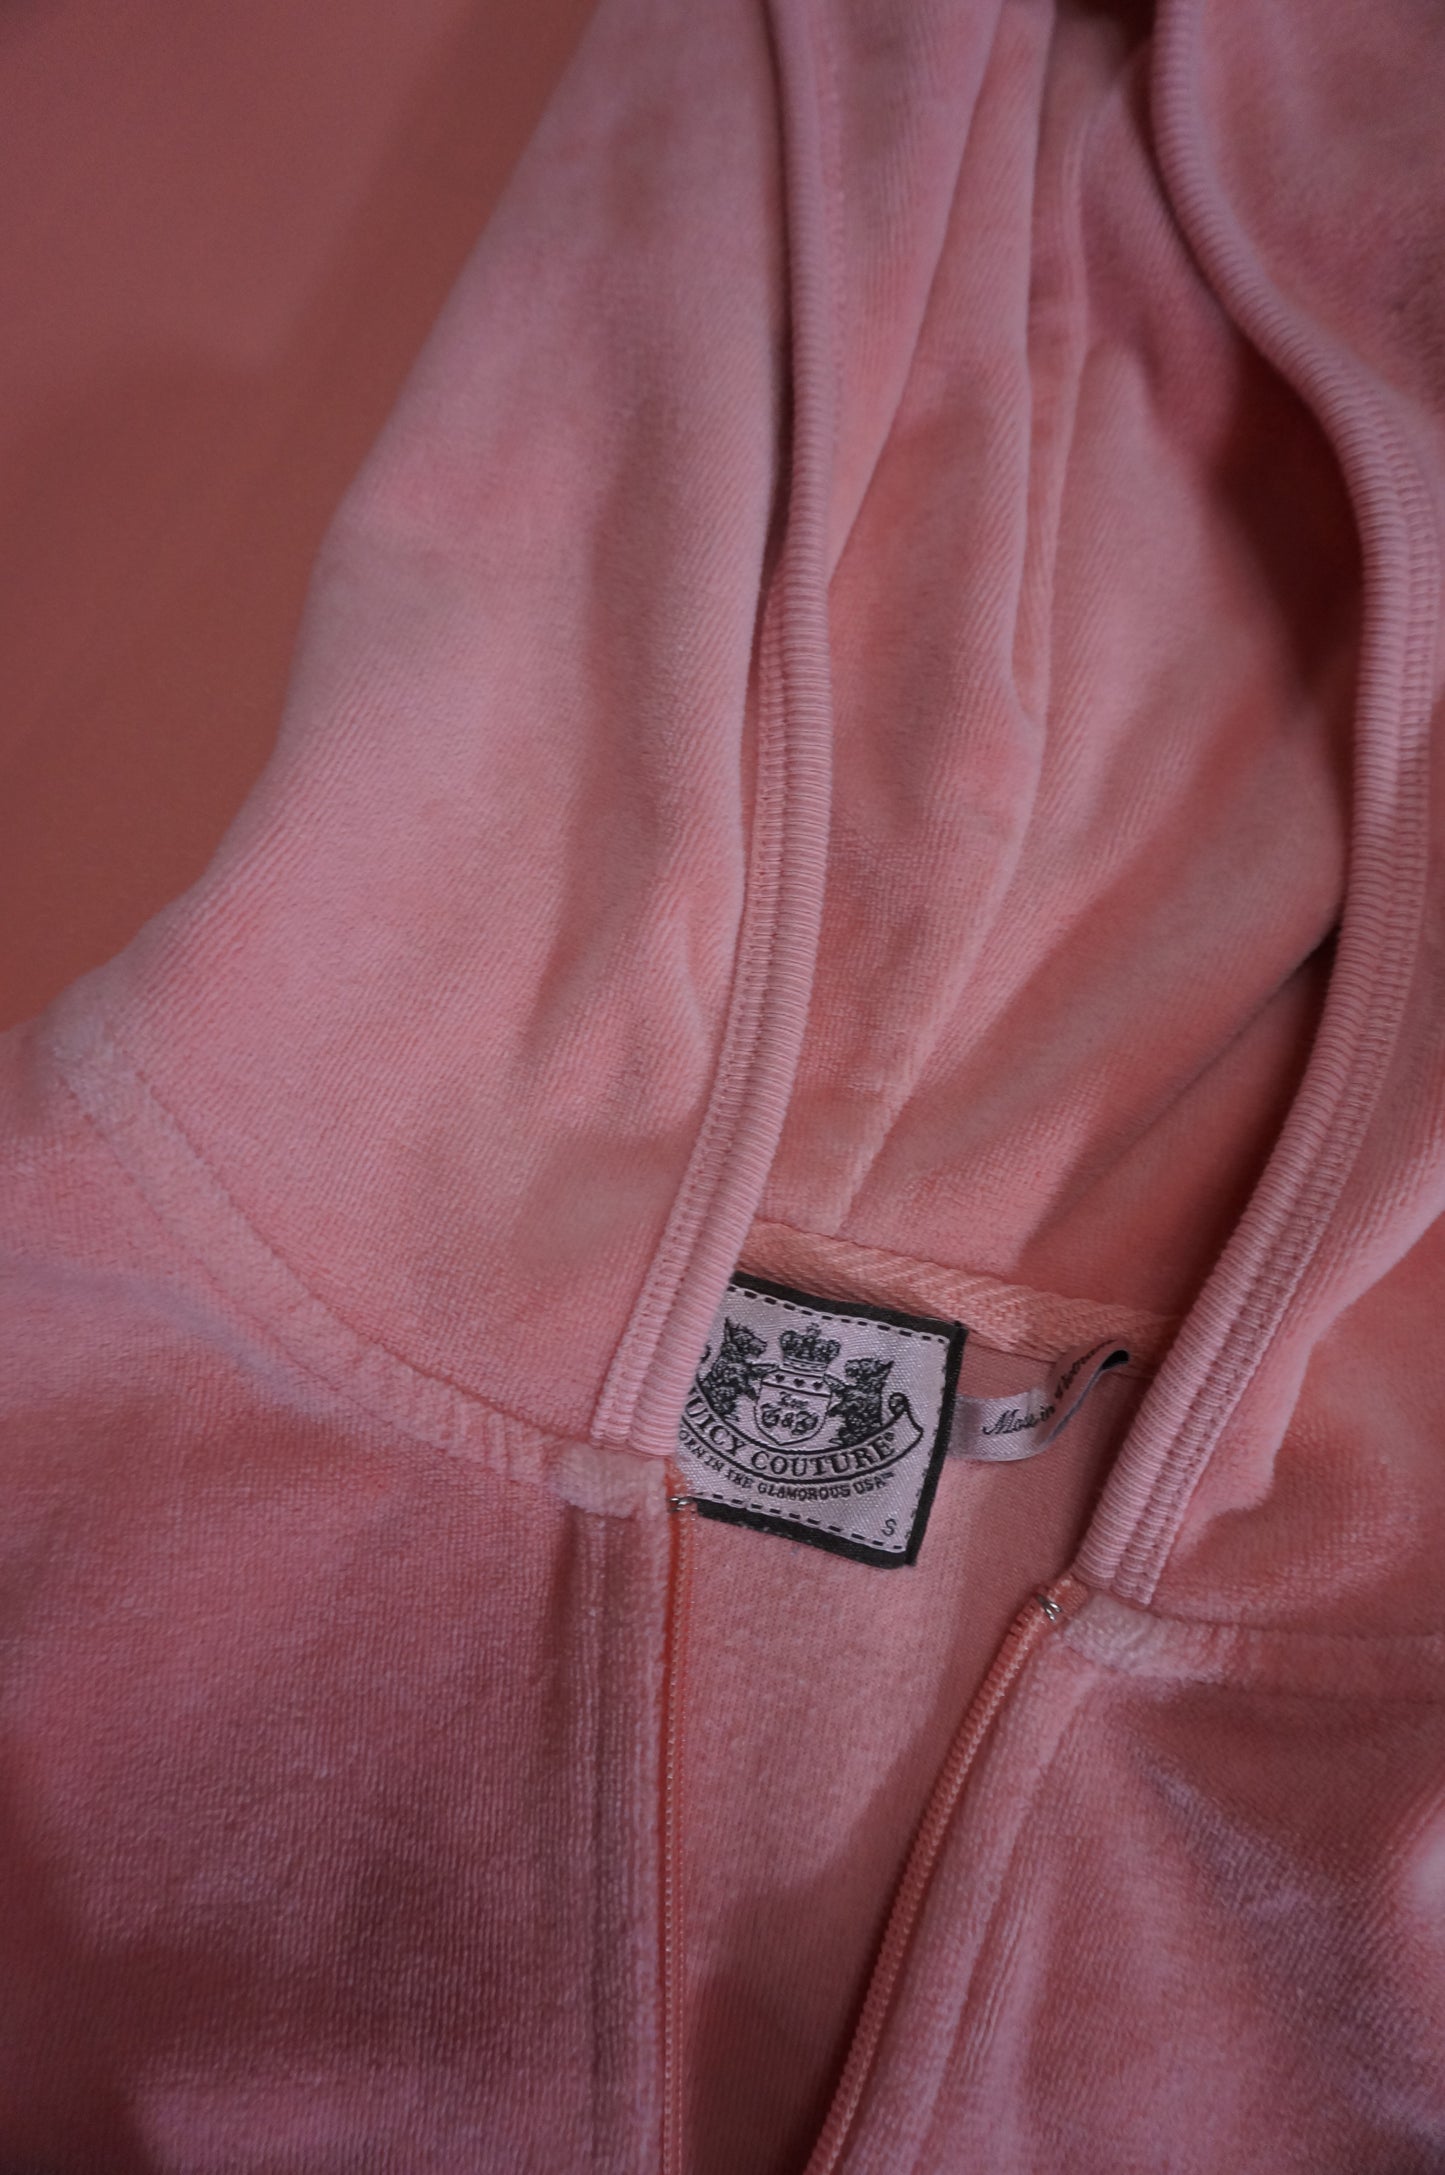 Pinkish Peach Juicy Couture Tracksuit